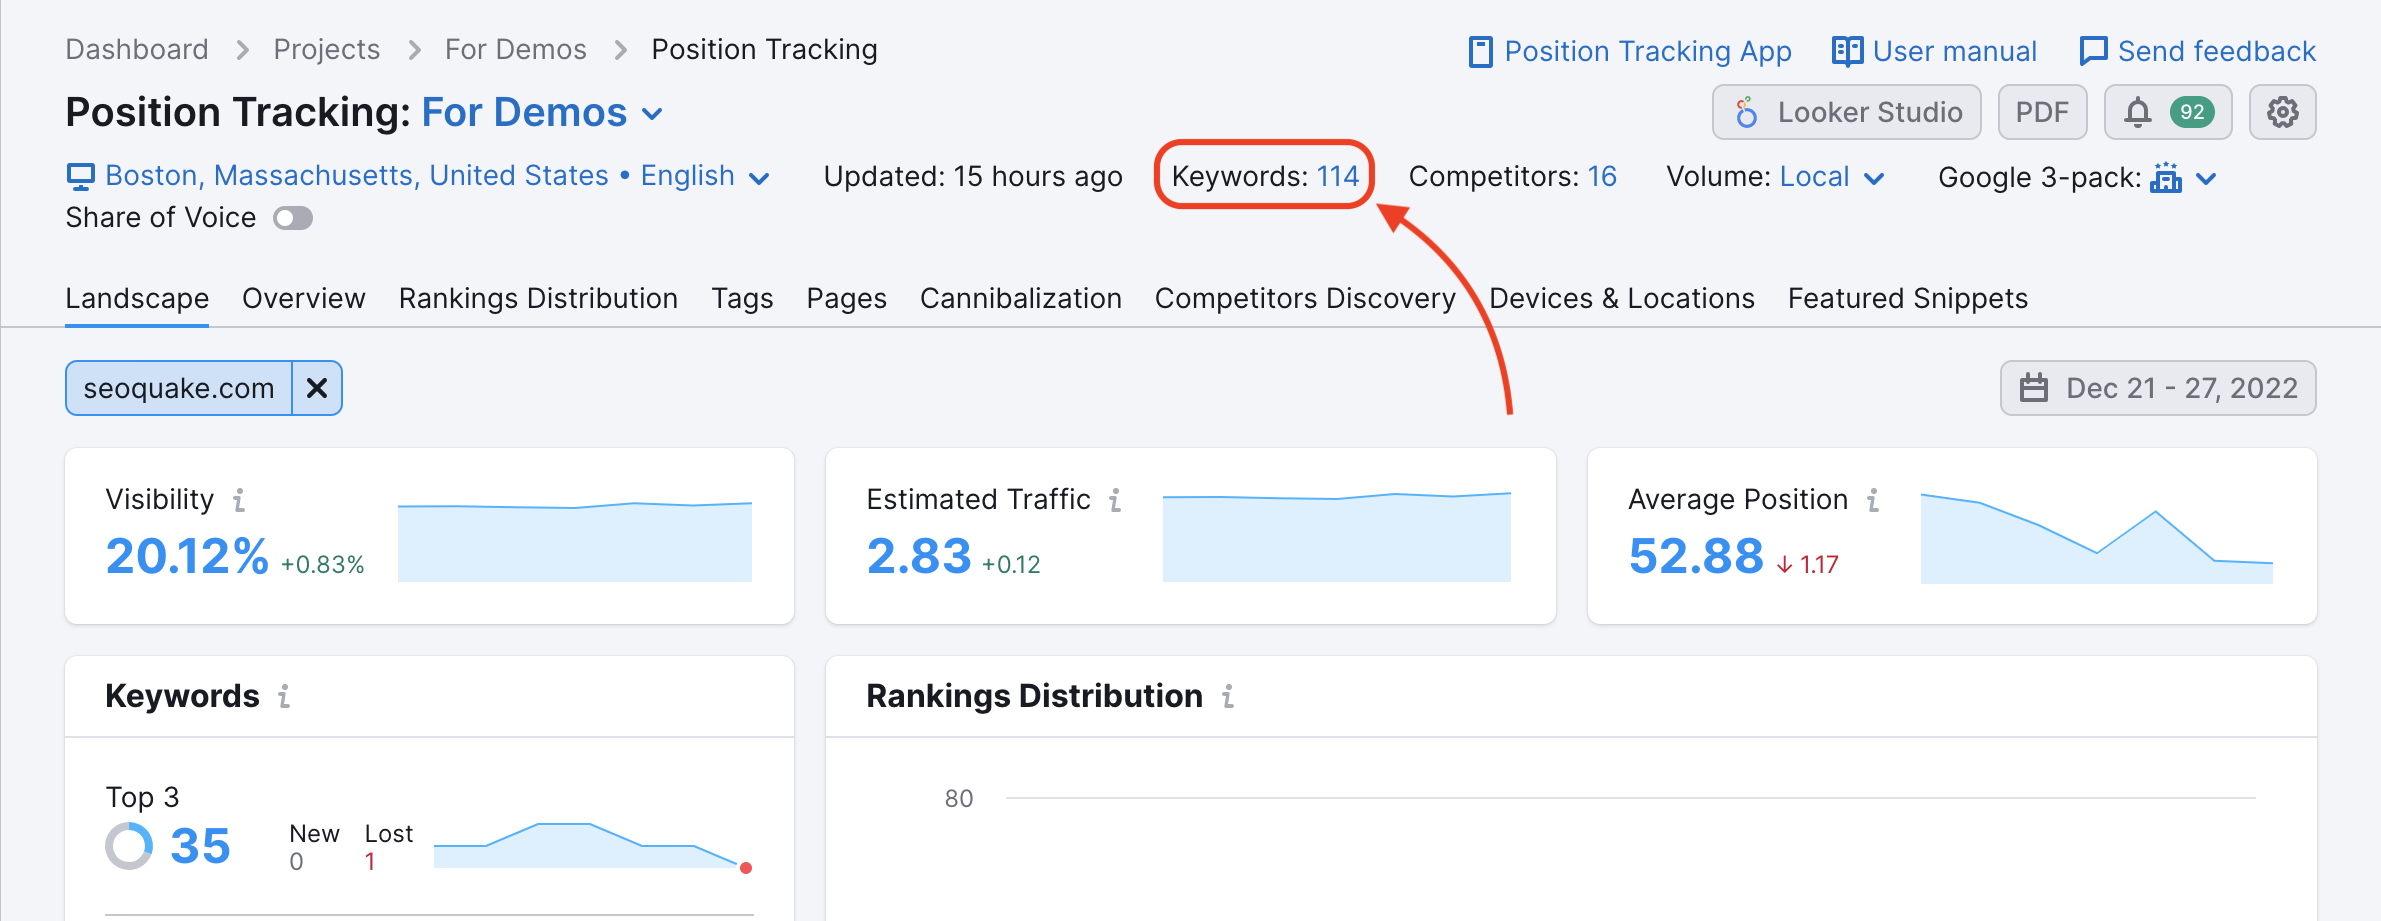 Number of keywords in Position Tracking